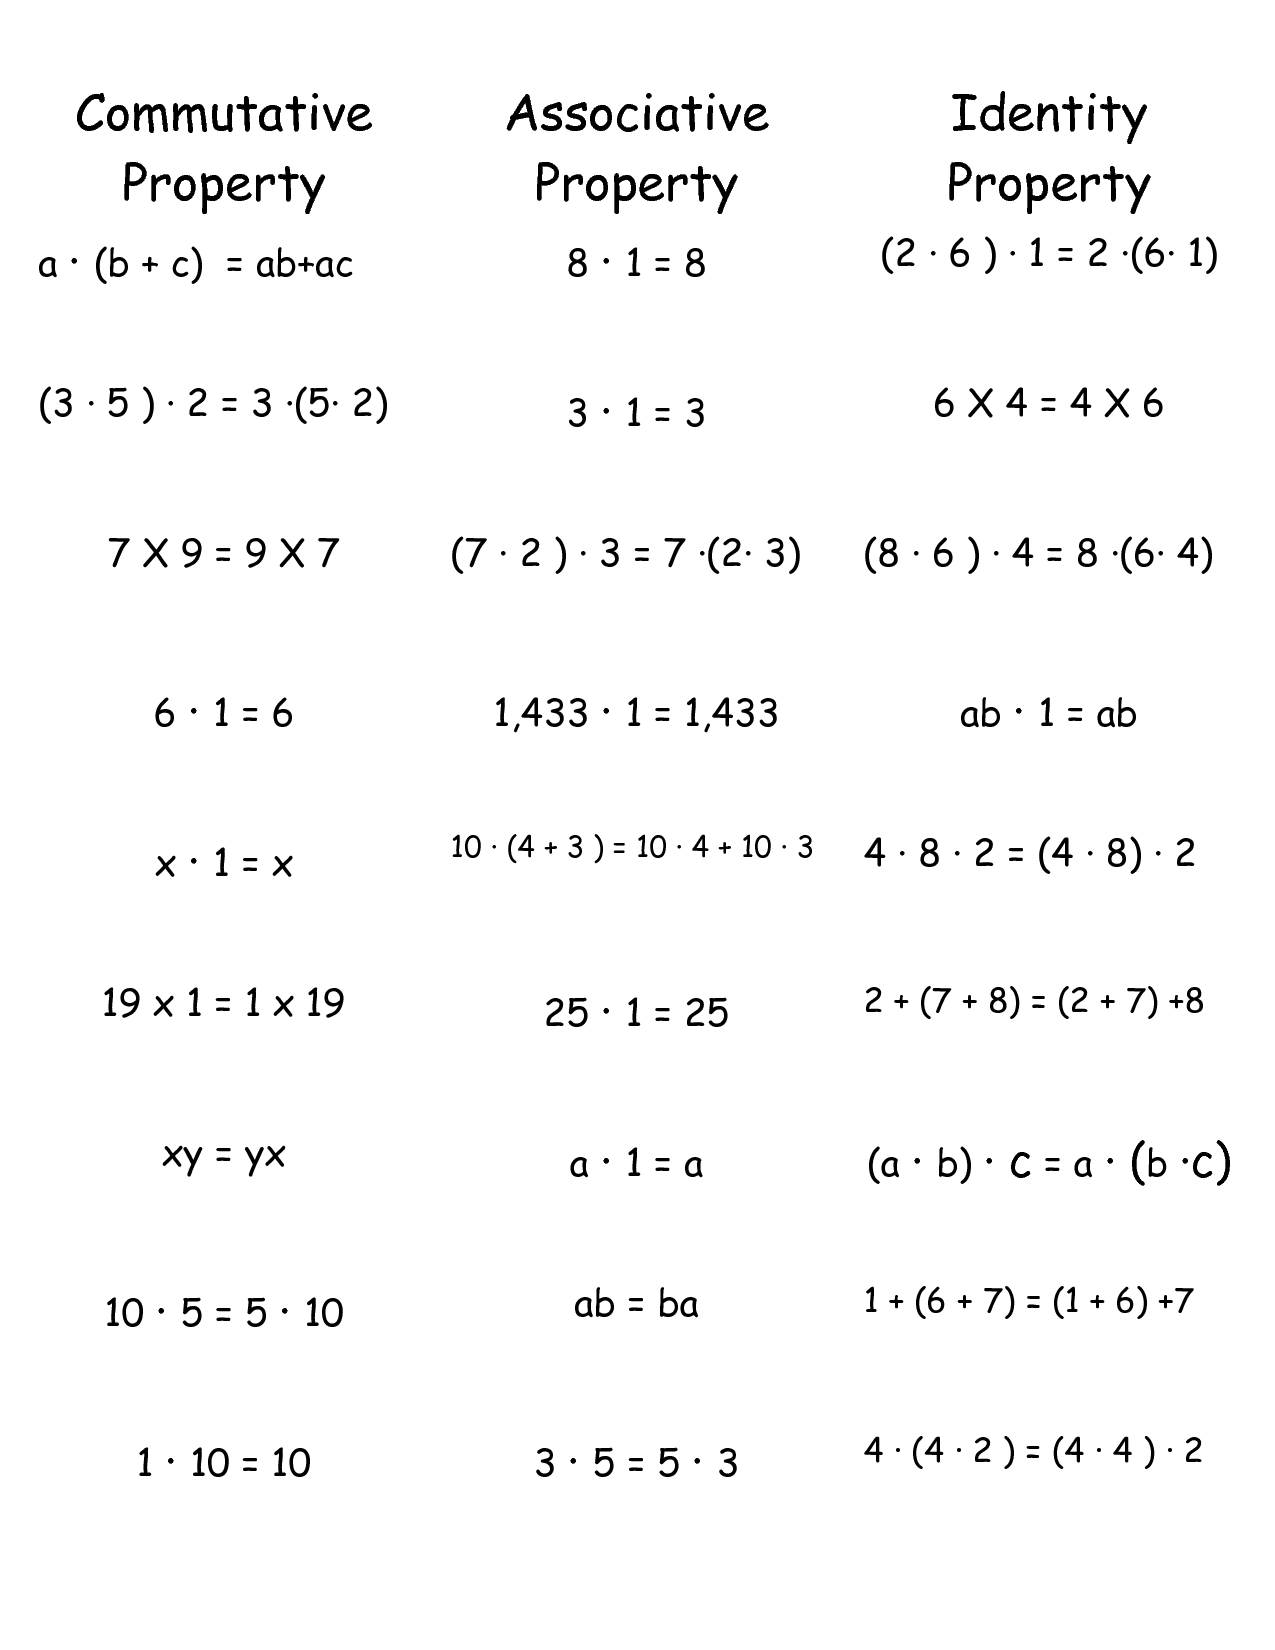 starting-with-multiplication-arrays-and-area-models-activities-mathcurious